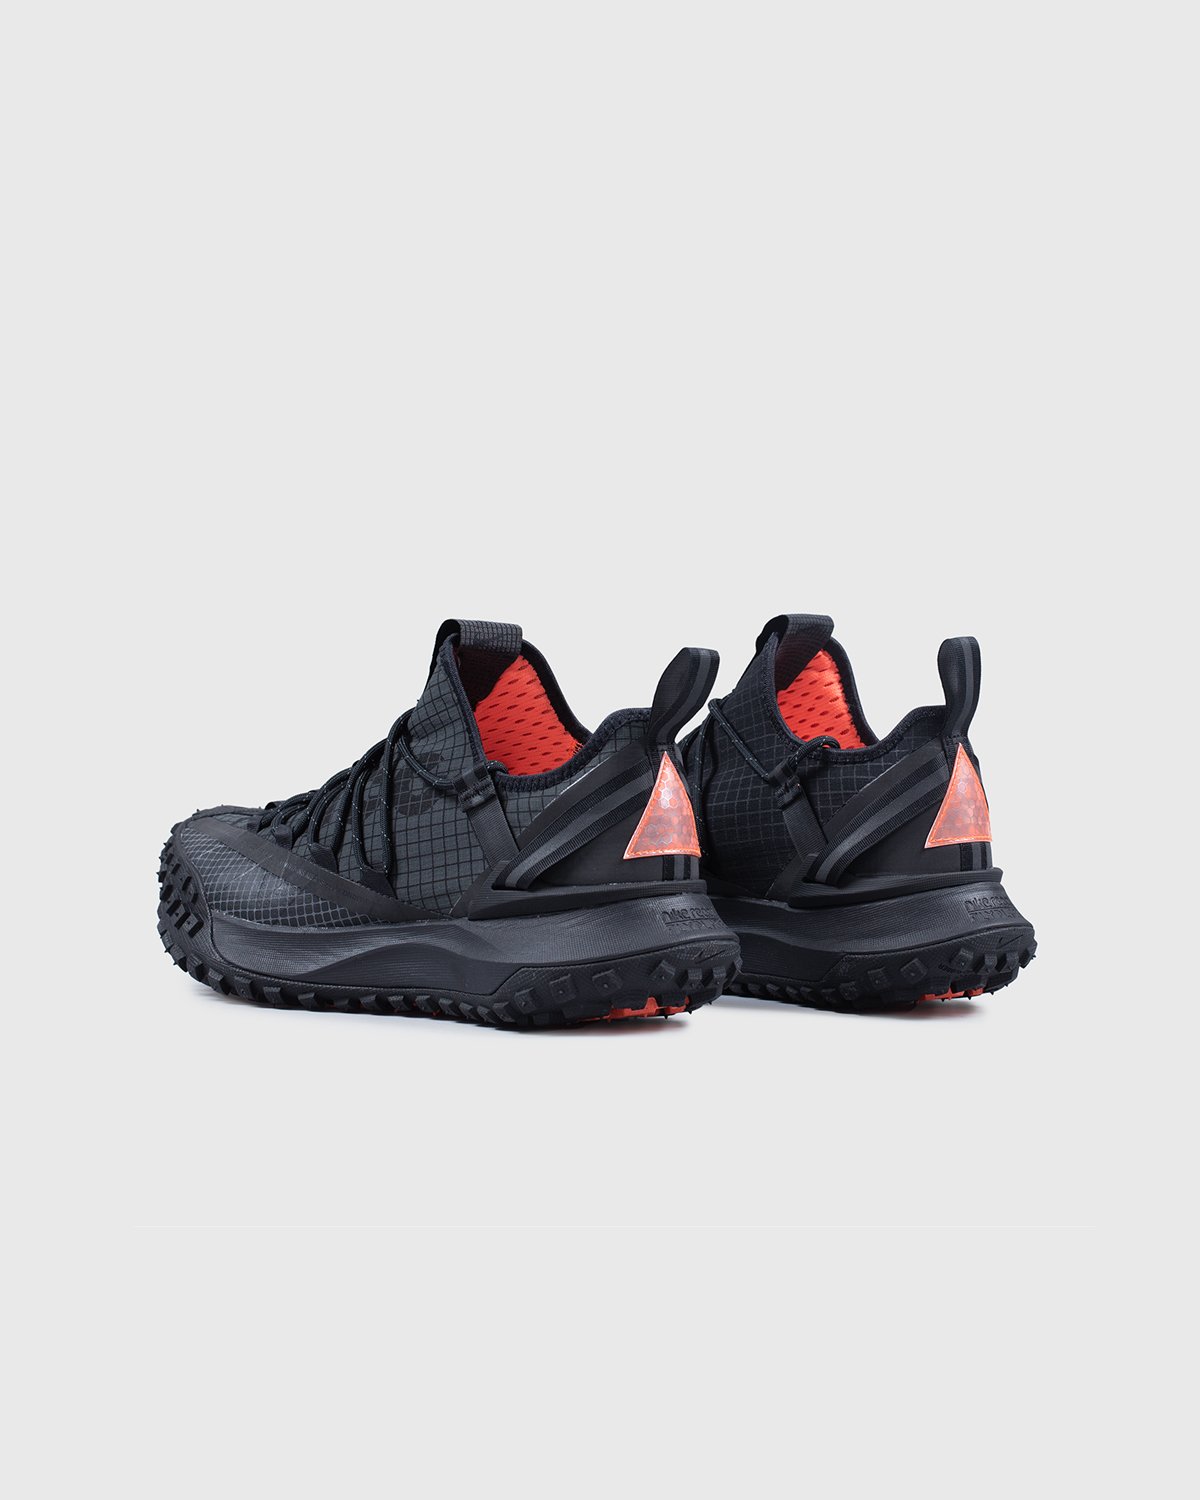 Nike ACG - Mountain Fly Low Anthracite - Footwear - Black - Image 3